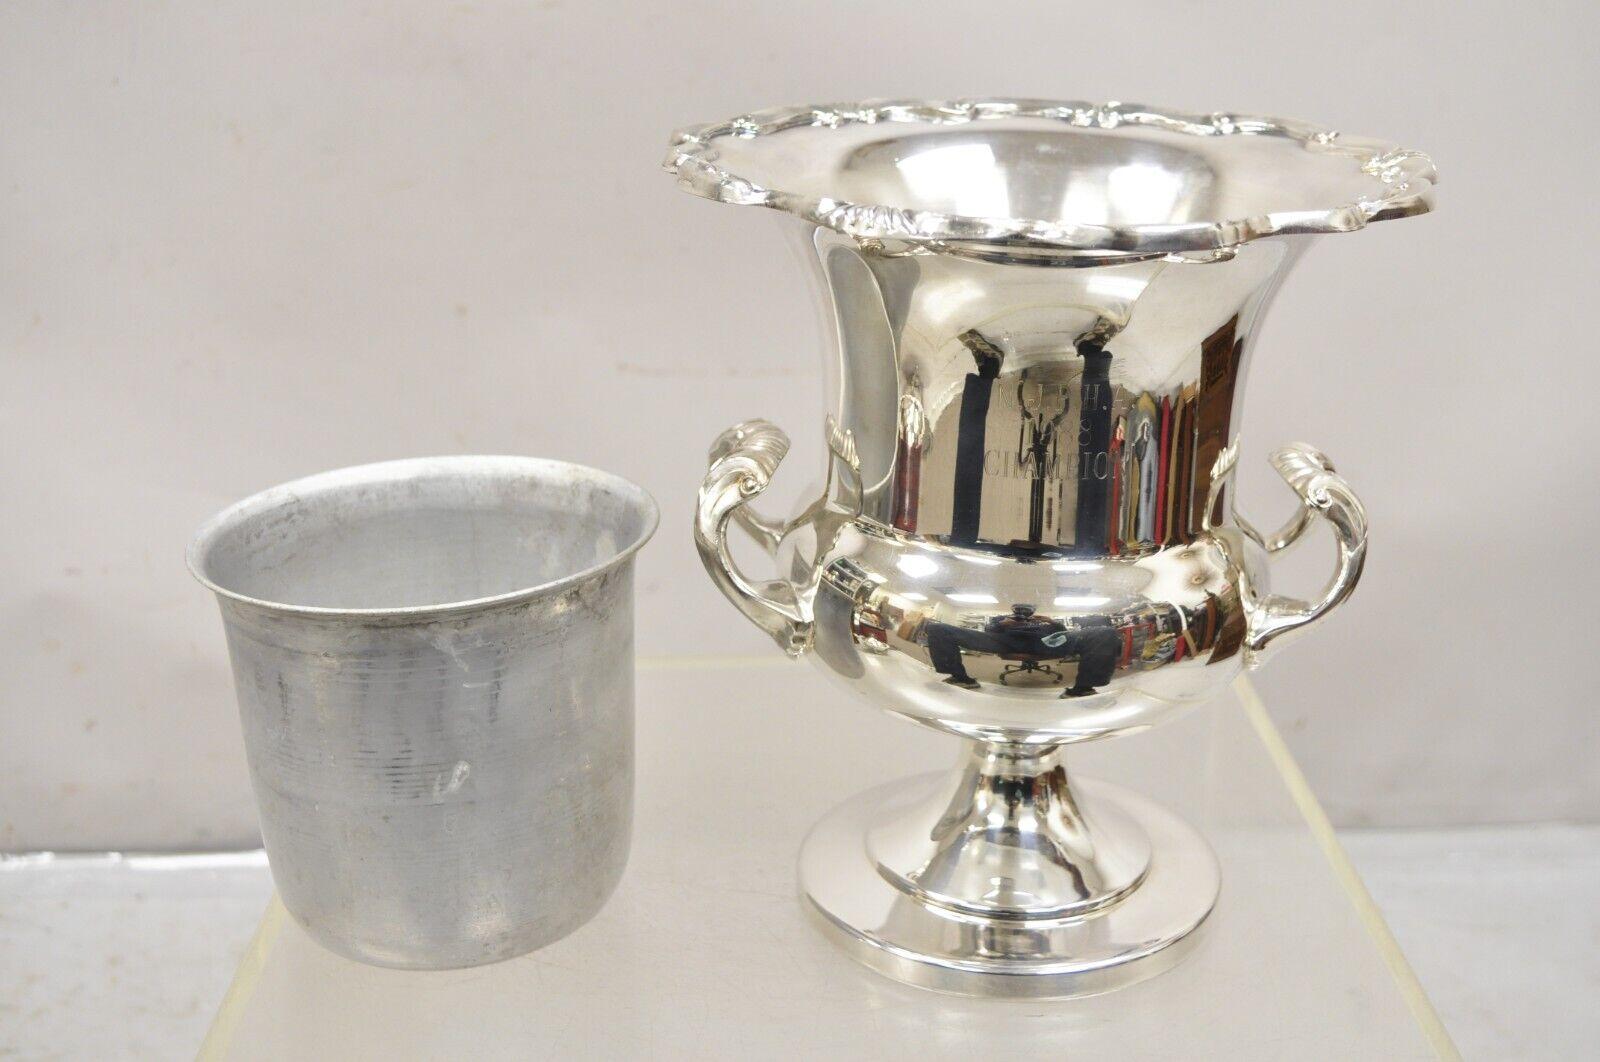 Towle Silver Plated Champagne Chiller Ice Bucket Trophy Cup NJPHA 1988 Champion For Sale 2